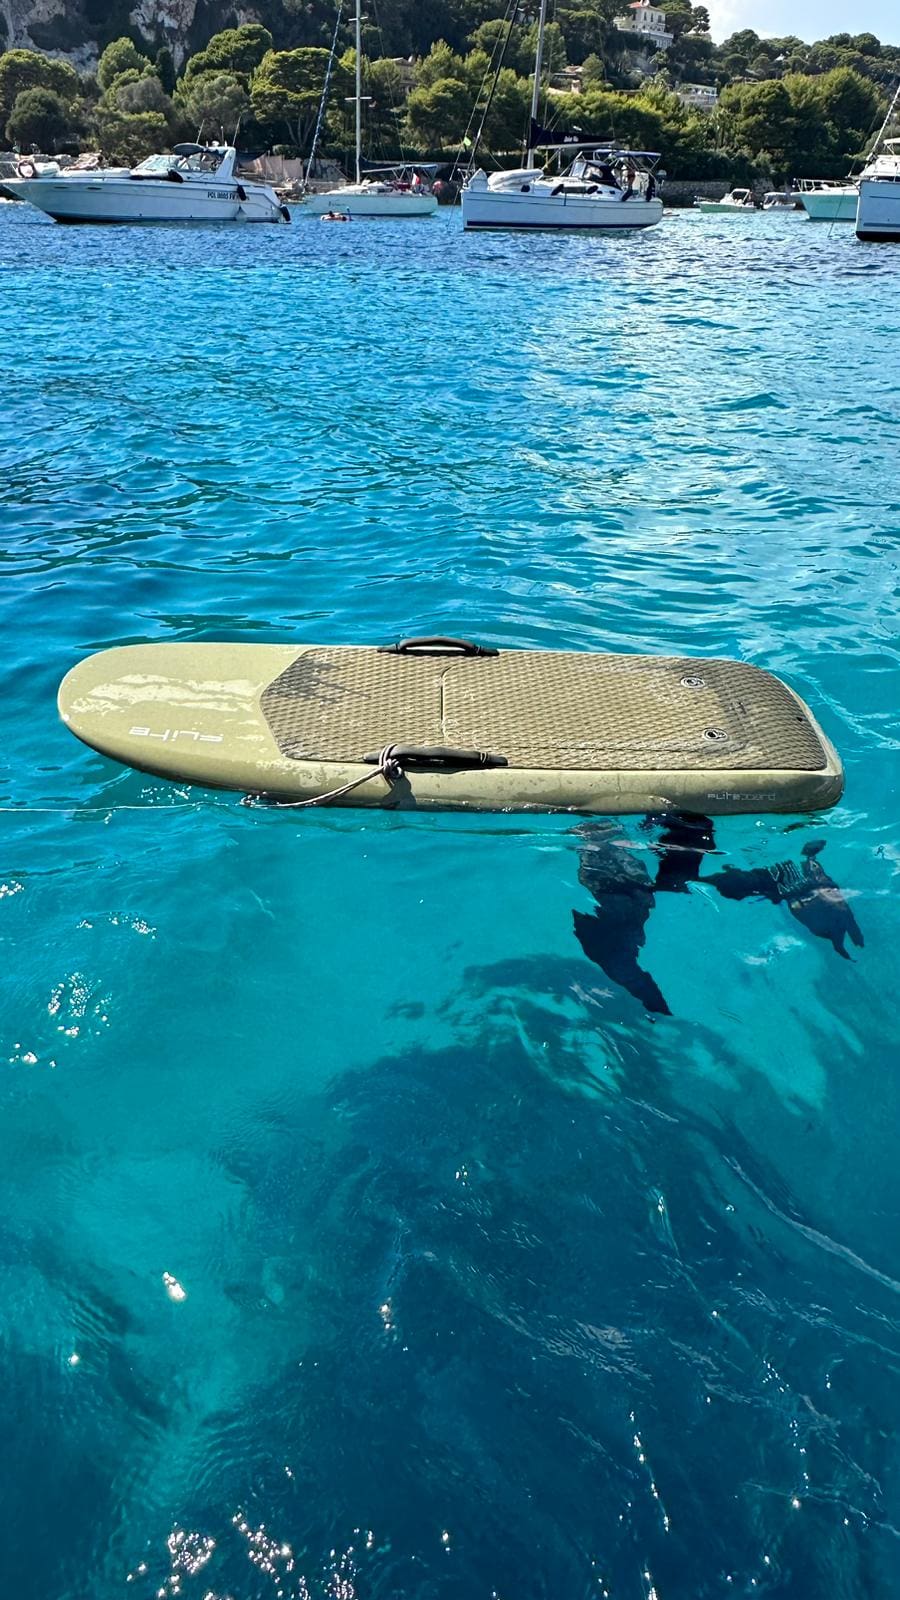 A Fliteboard floating in the water